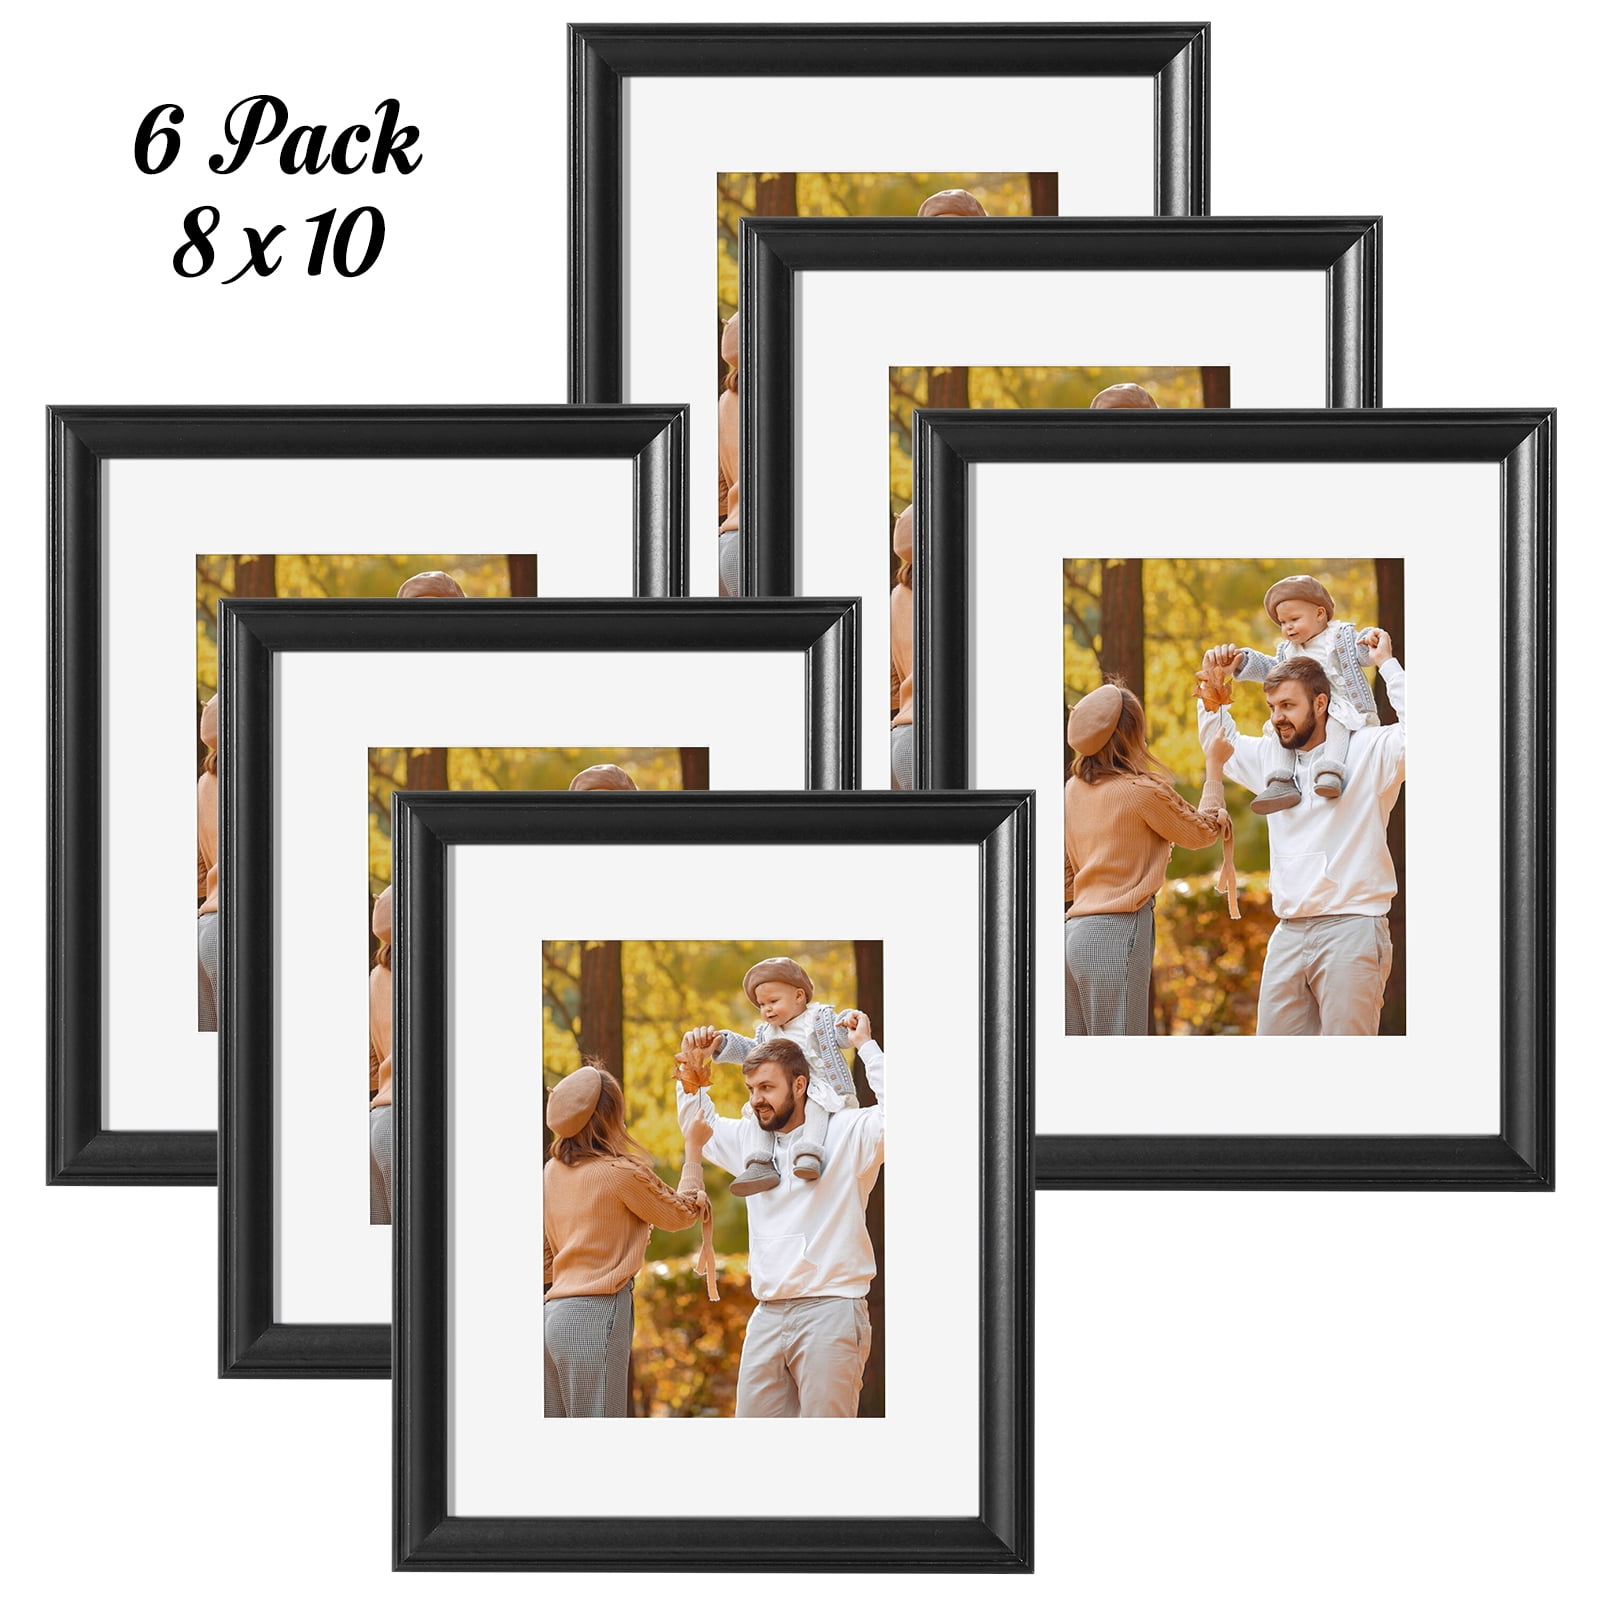 Shop for 16x24 poster frame online at Target. Free shipping on purchases  over $35 and save 5% every day with your Target R…